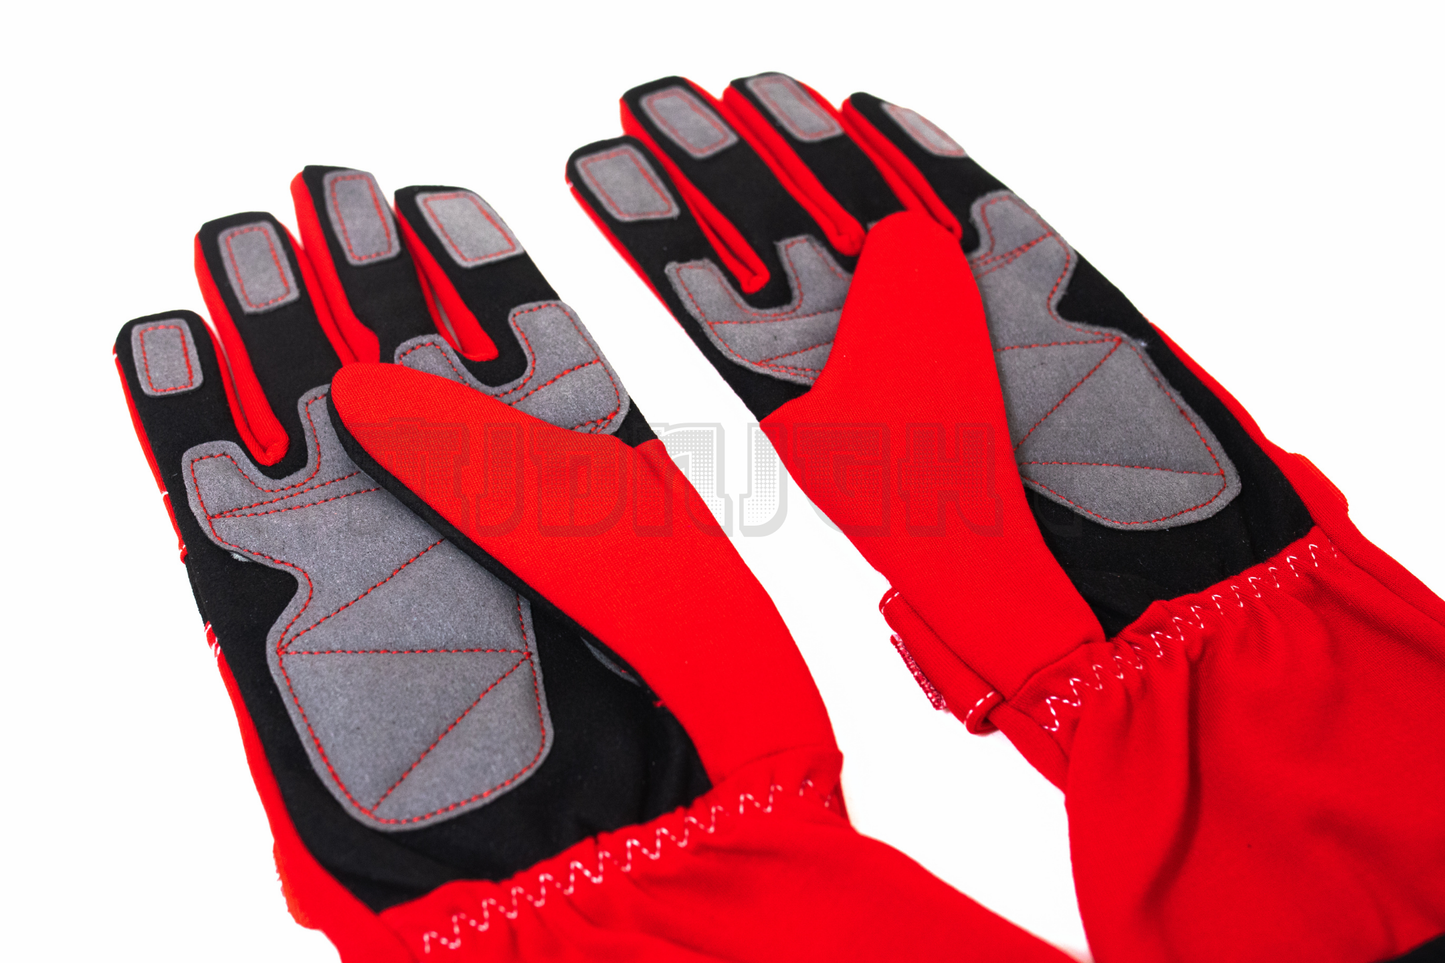 SPARCO Red Racing Gloves